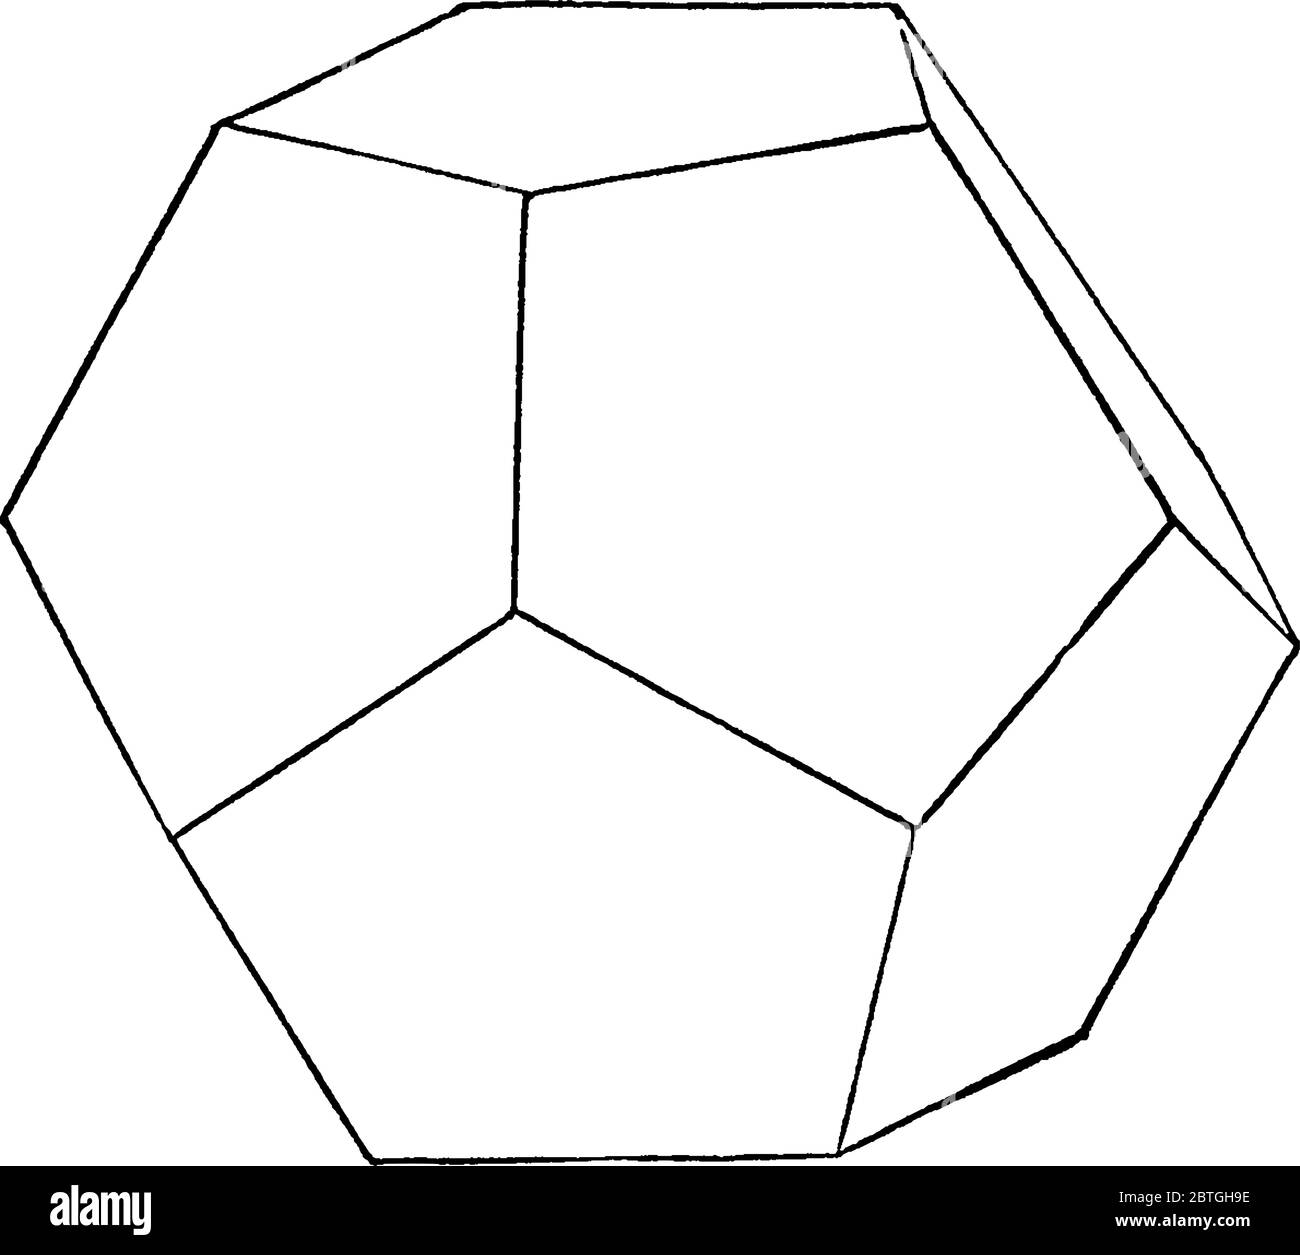 Regular Dodecahedron is a Platonic solid with twelve pentagonal faces., vintage line drawing or engraving illustration. Stock Vector